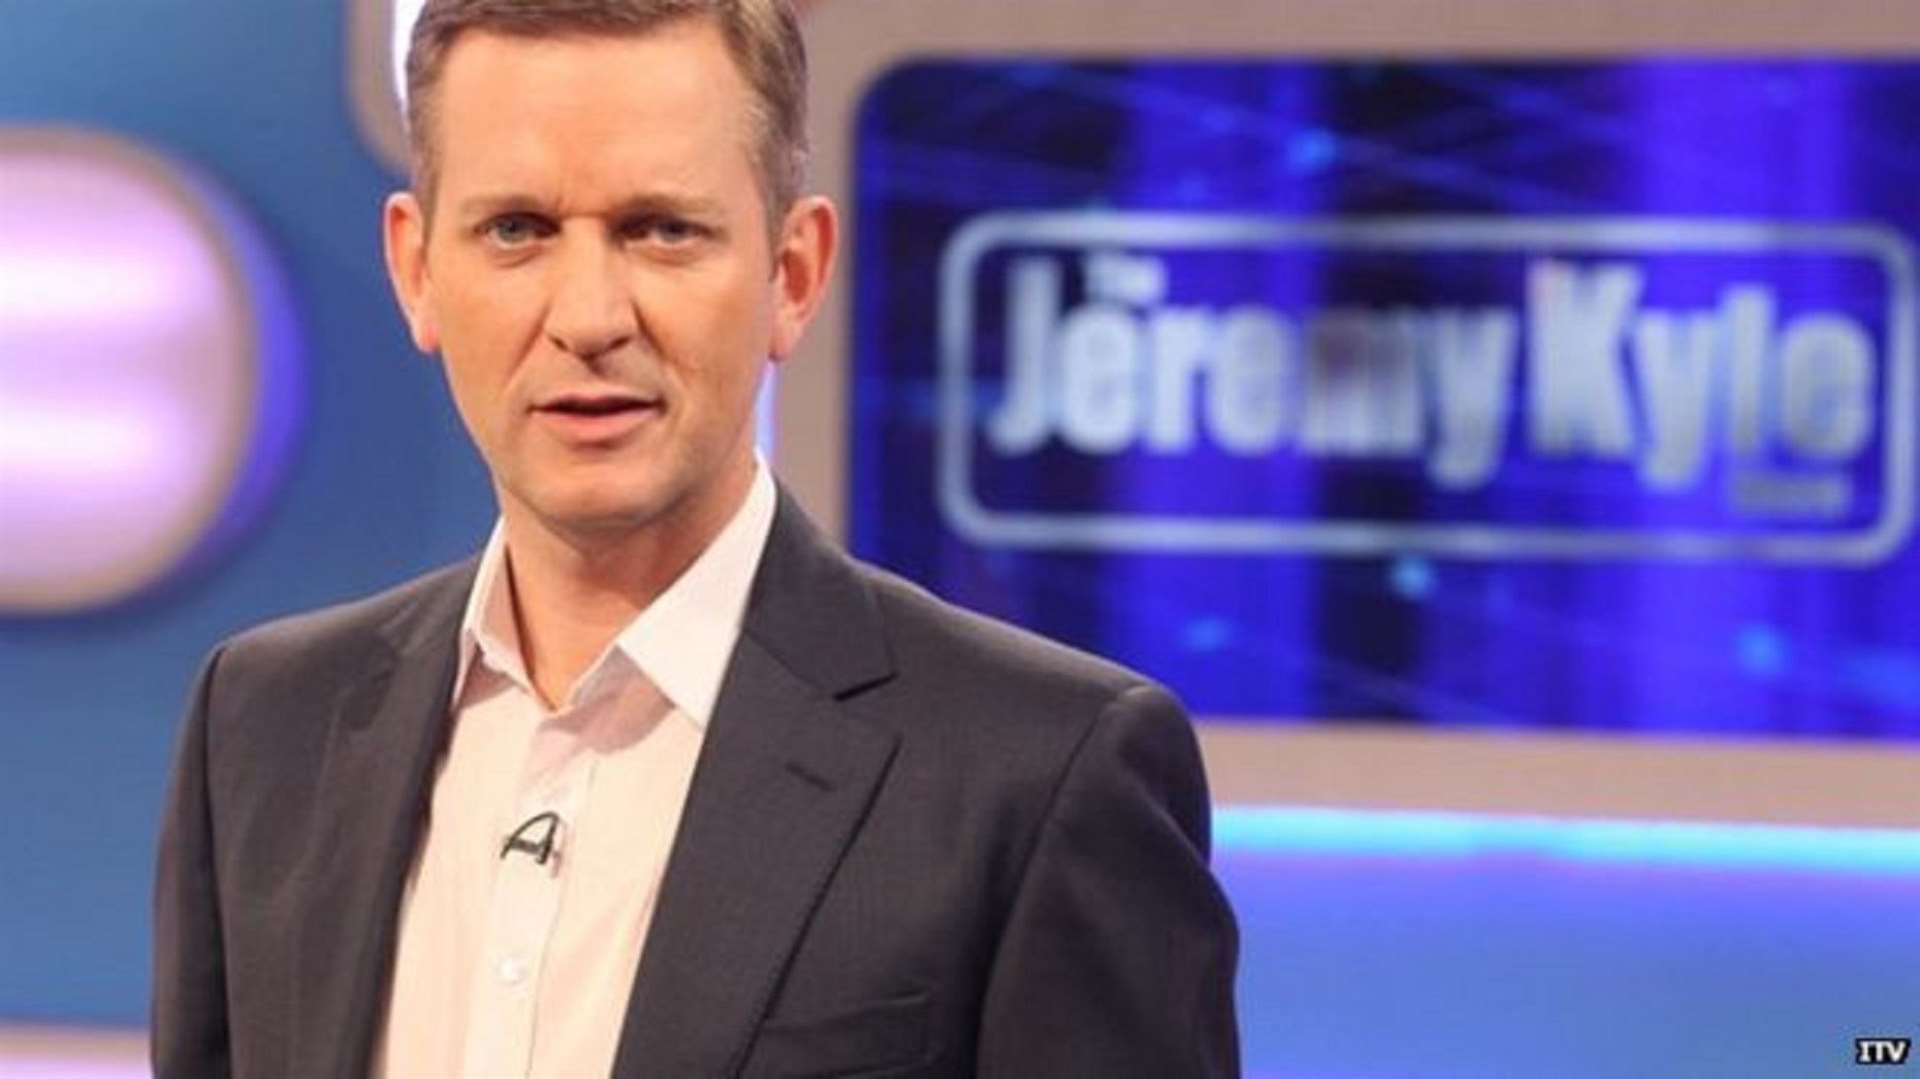 Jeremy Kyle was subject to the inquiry into his show following the death of one of the guests.